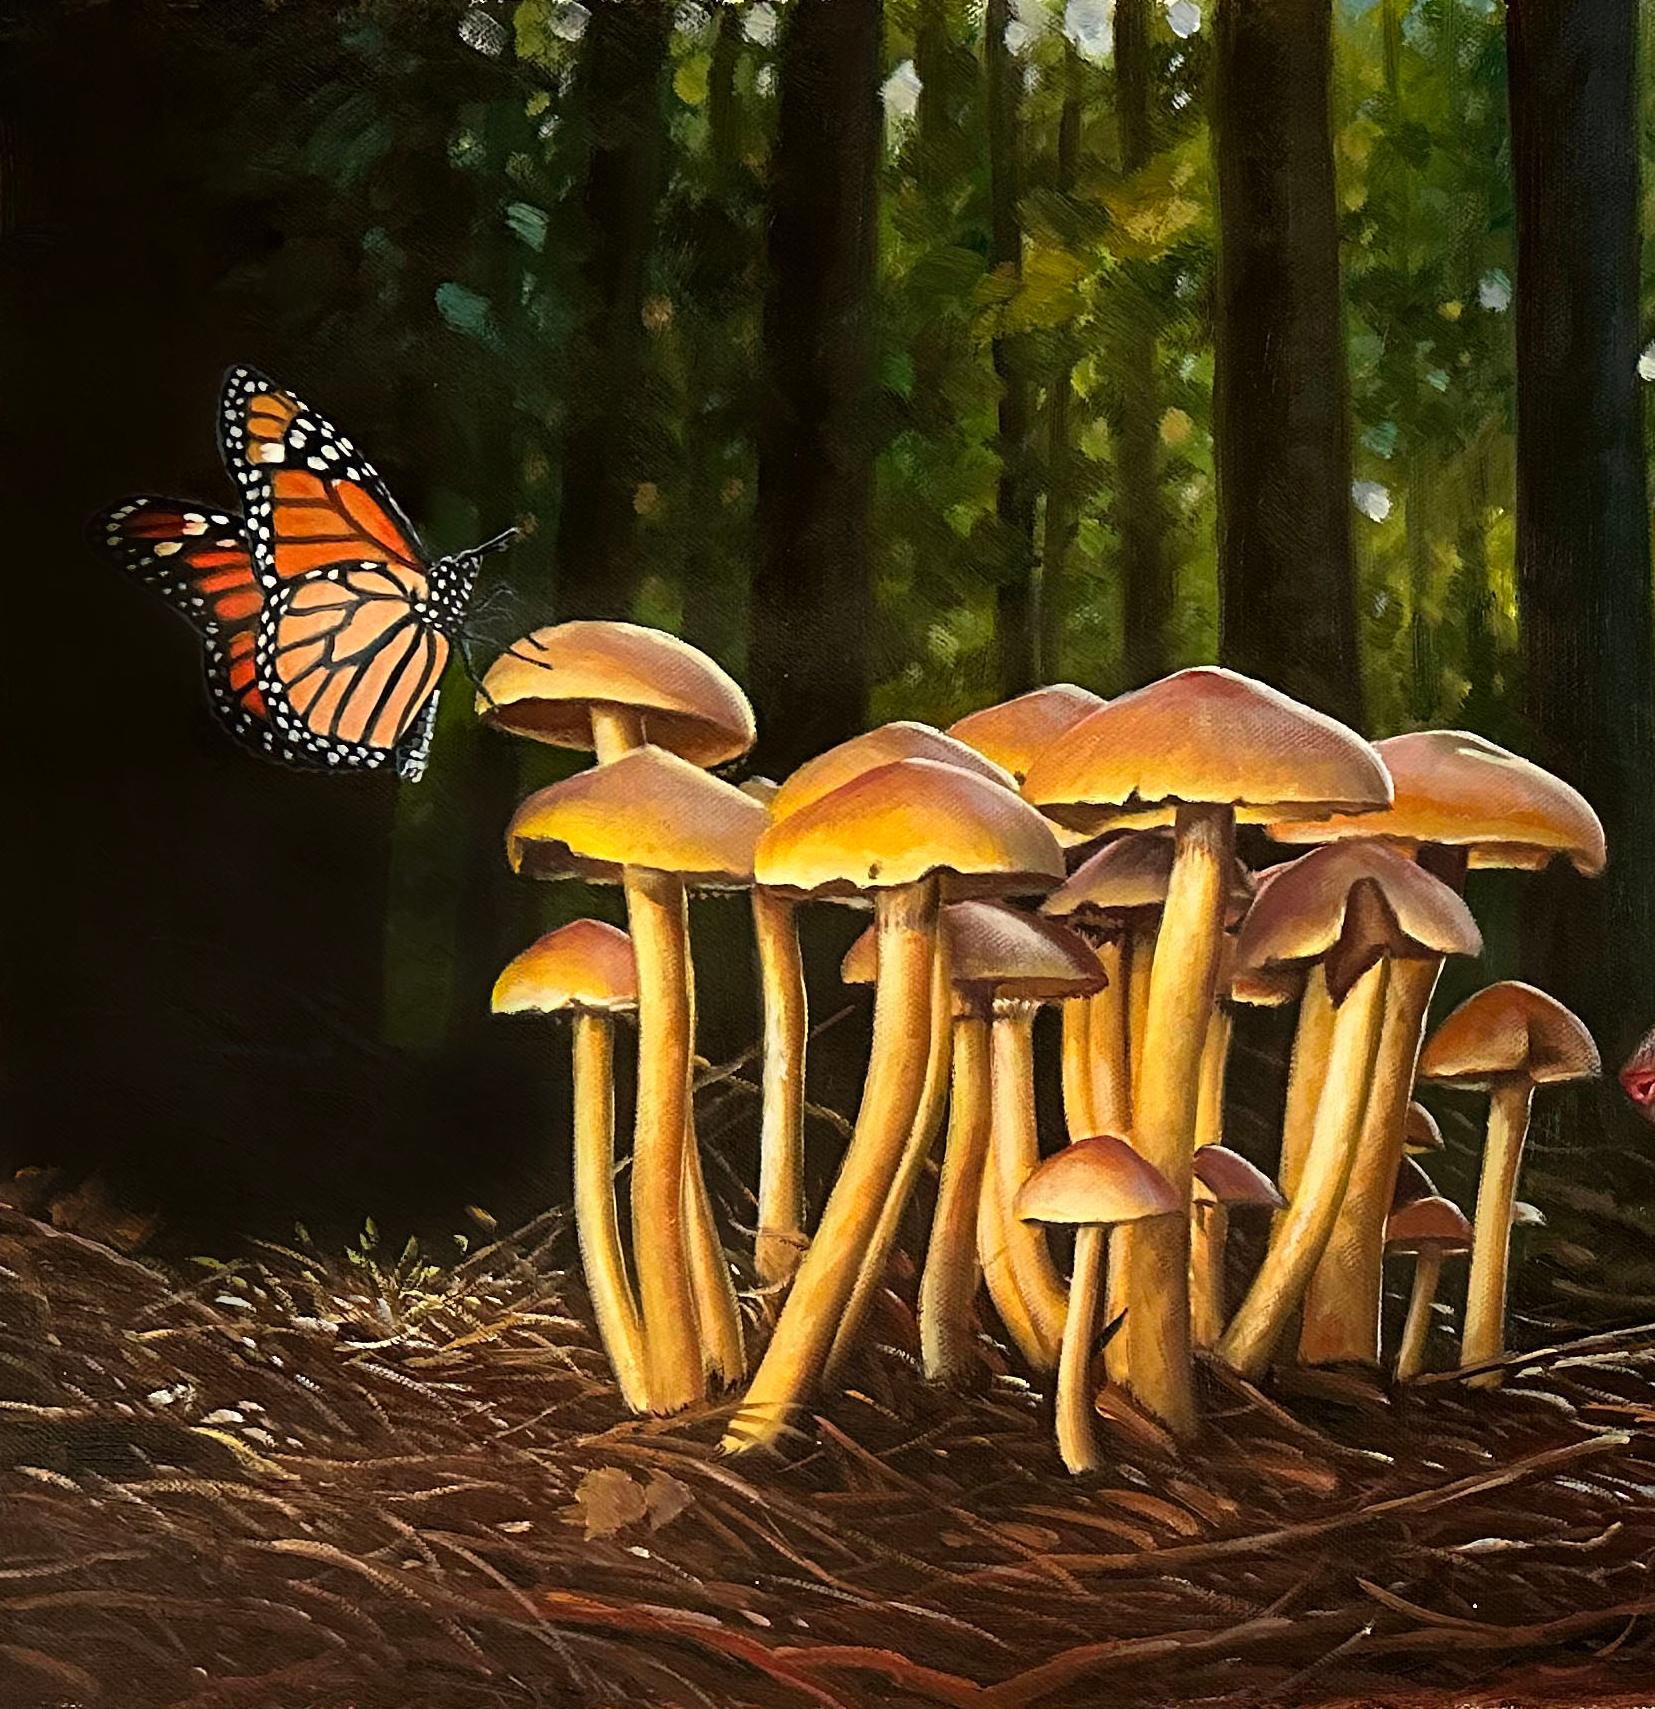 Sparrow and Jumping Mouse Find the Magic Mushrooms - Painting by Marc Dennis